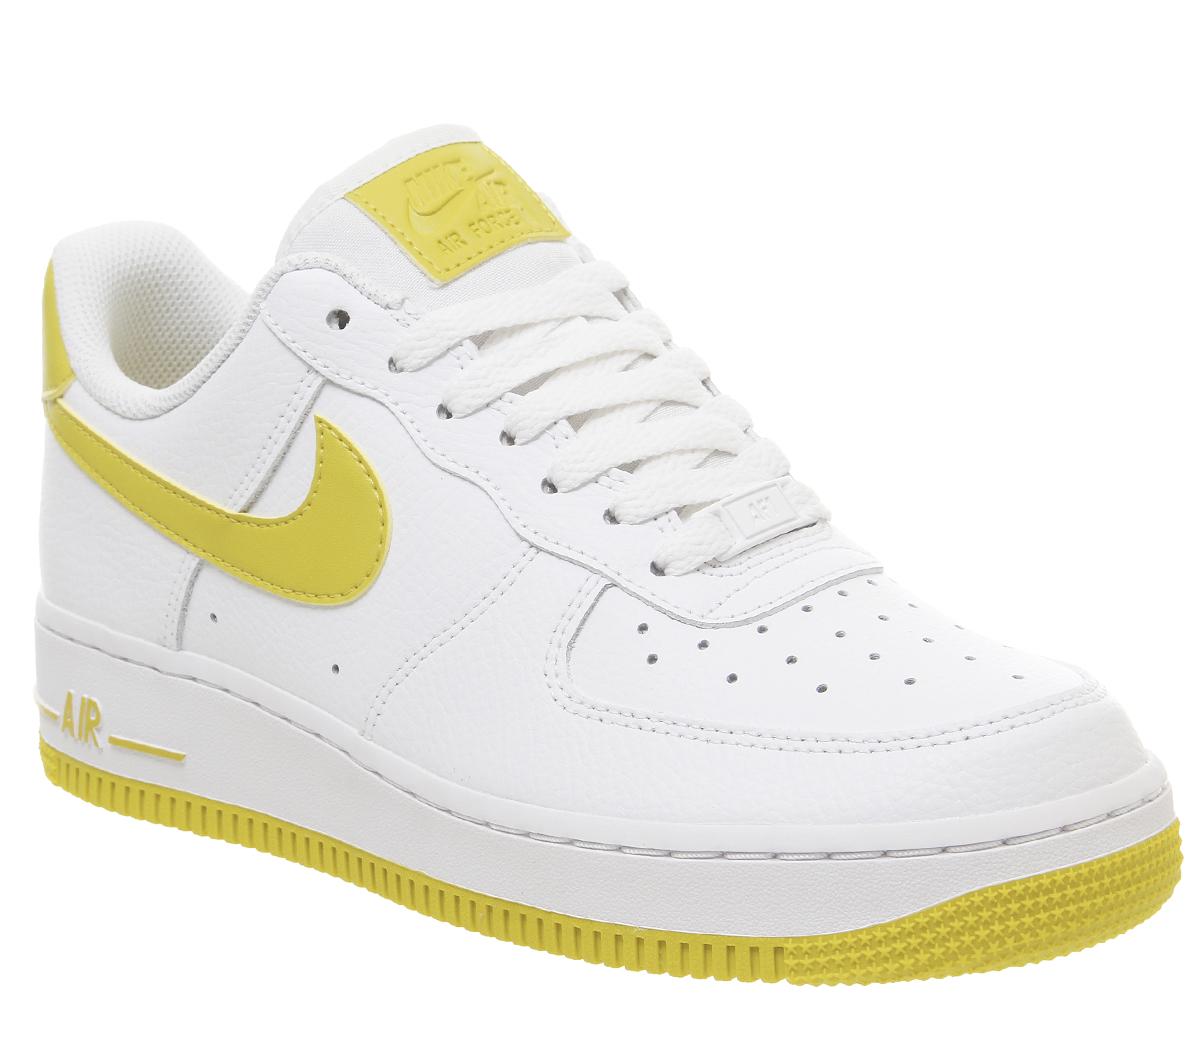 NikeAir Force 1 07 TrainersWhite Bright Citron